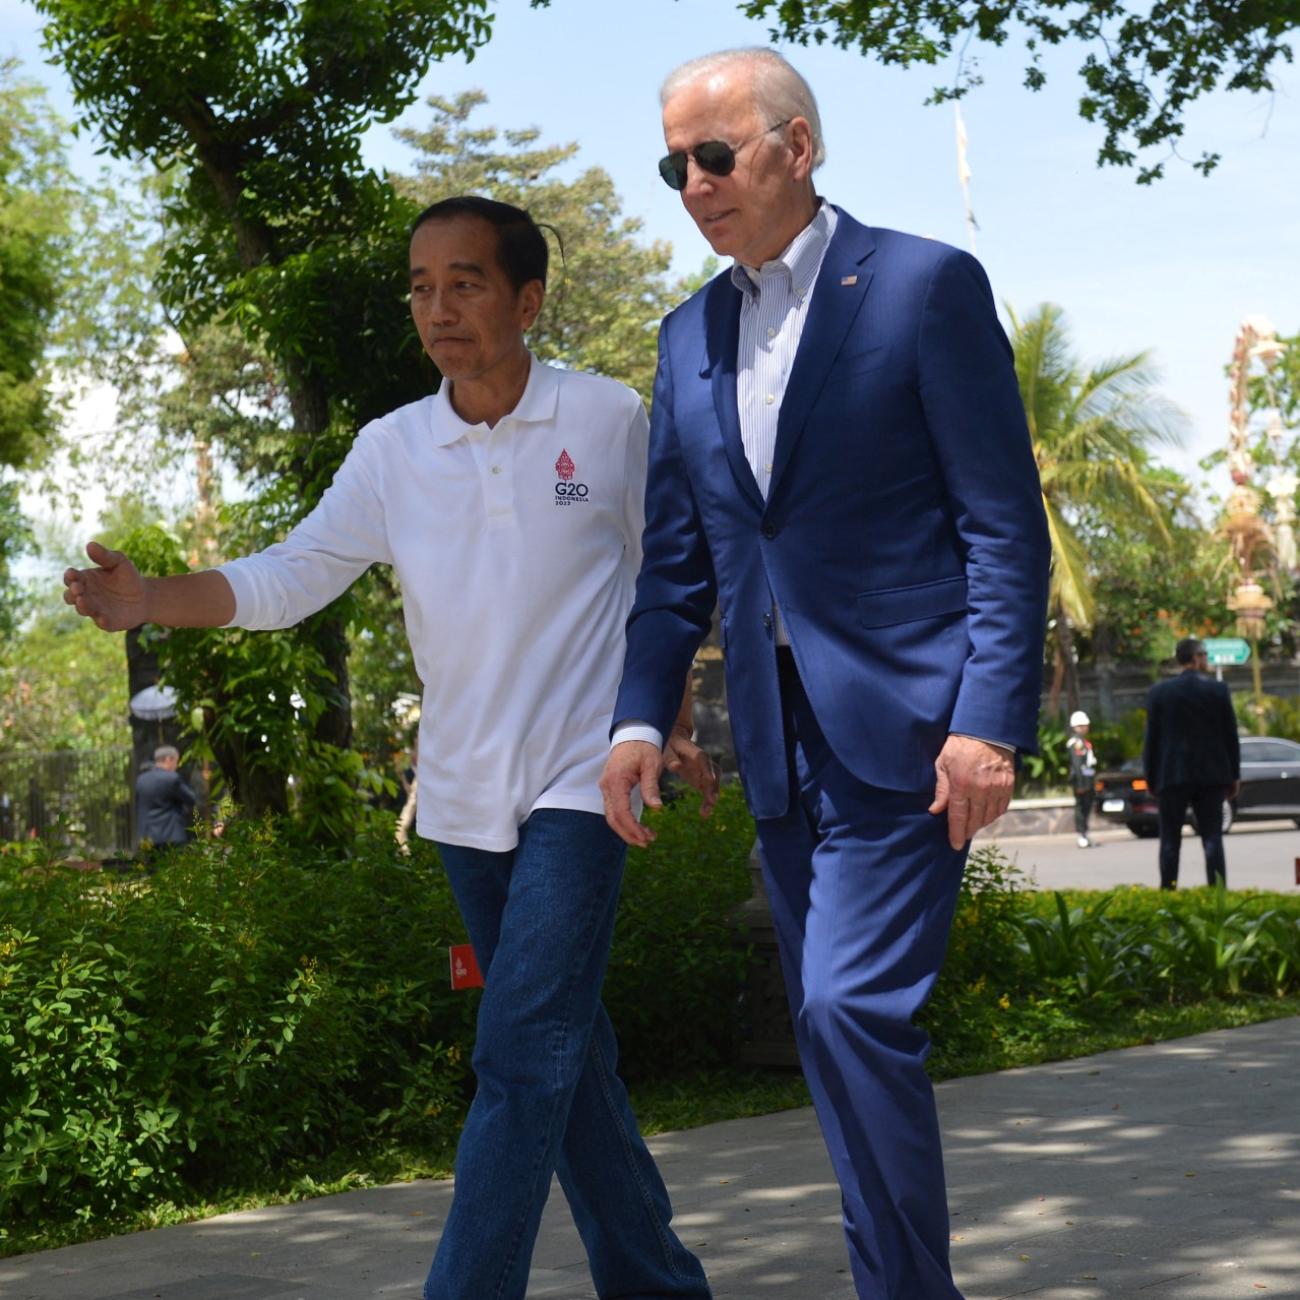 Indonesian President Joko Widodo welcomes U.S. President Joe Biden on the second day of the G20 Indonesia Summit events at the Ngurah Rai Forest Park, Denpasar, Bali, Indonesia, on November 16, 2022.